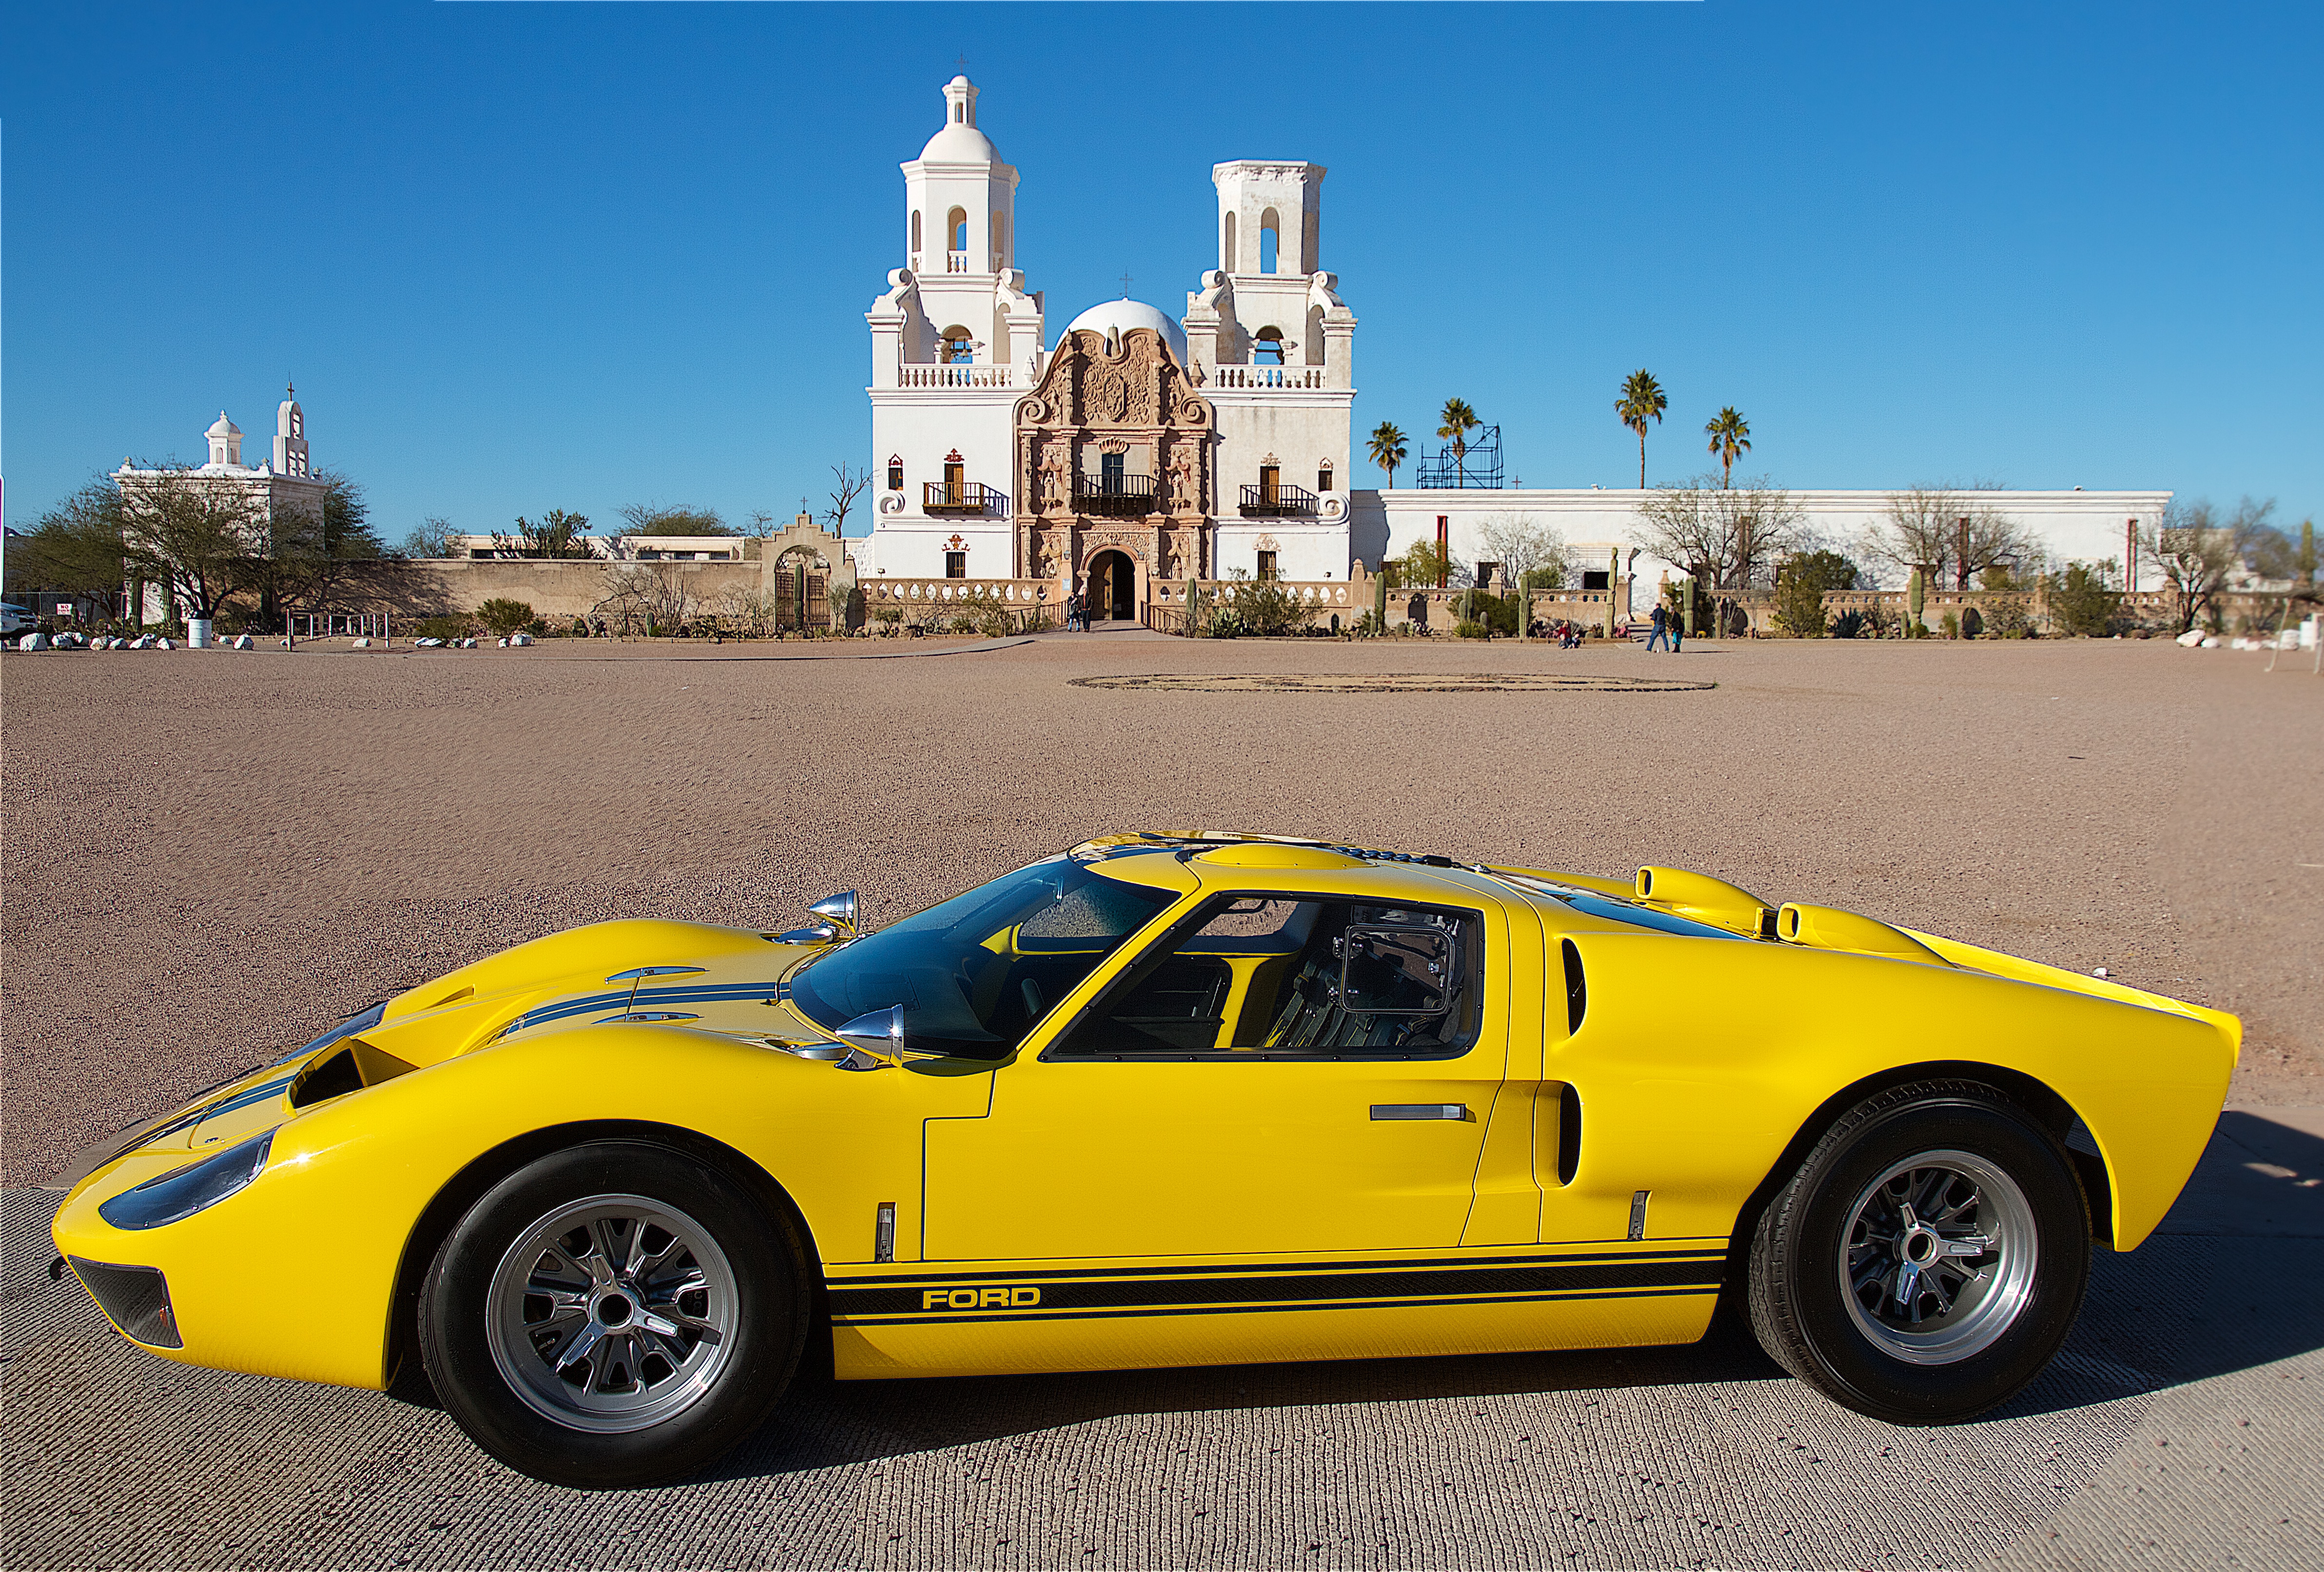 yellow and black superformance gt40 at san Xavier mission tucson